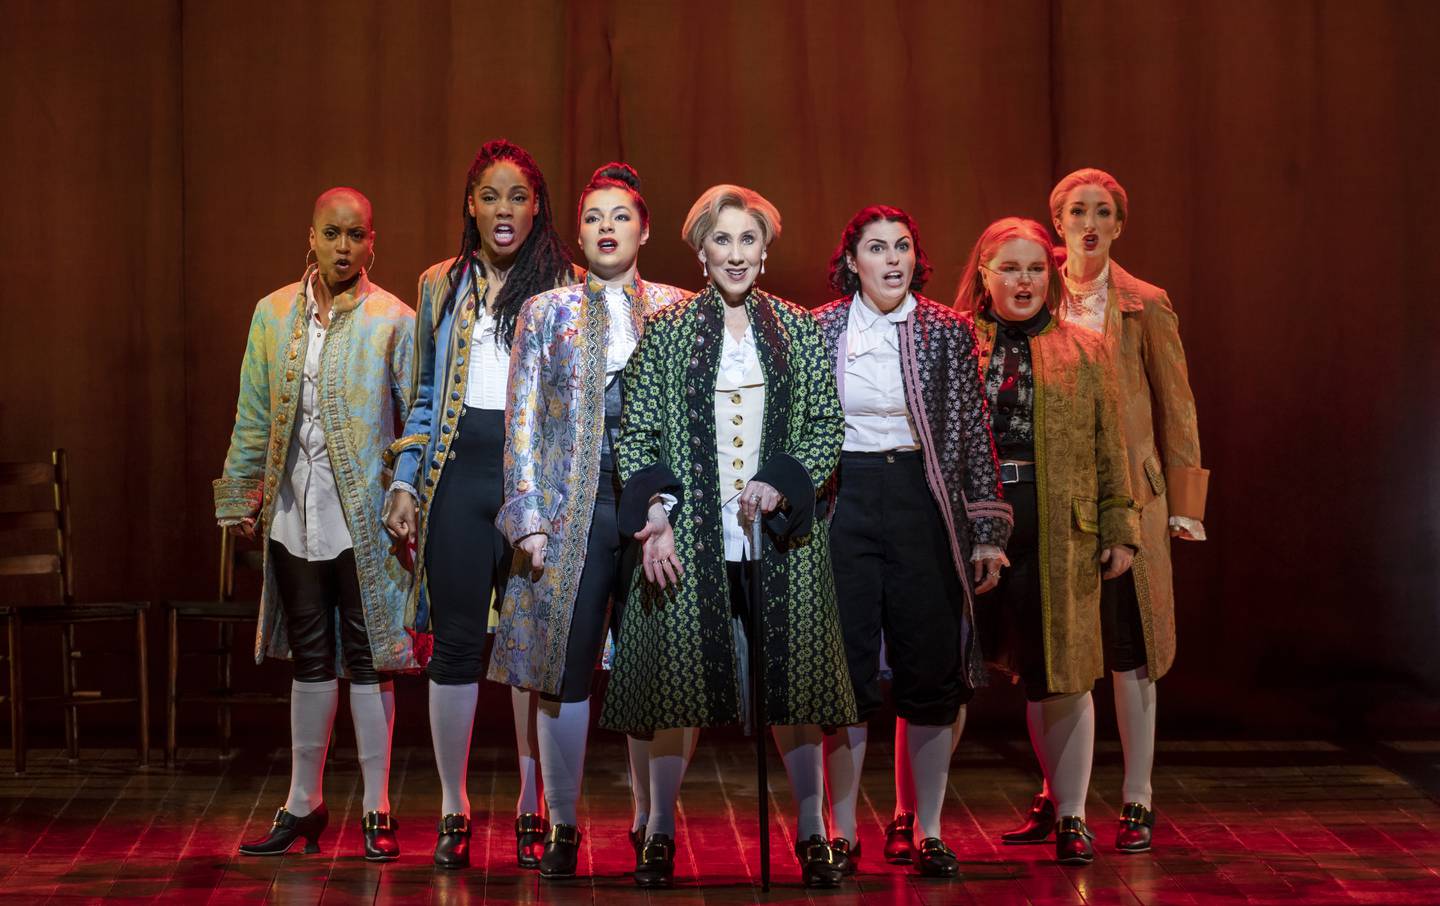 "Cool, Cool Considerate Men” with JoannaGlushak (center) as John Dickinson and the National Tour Cast of the musical "1776."